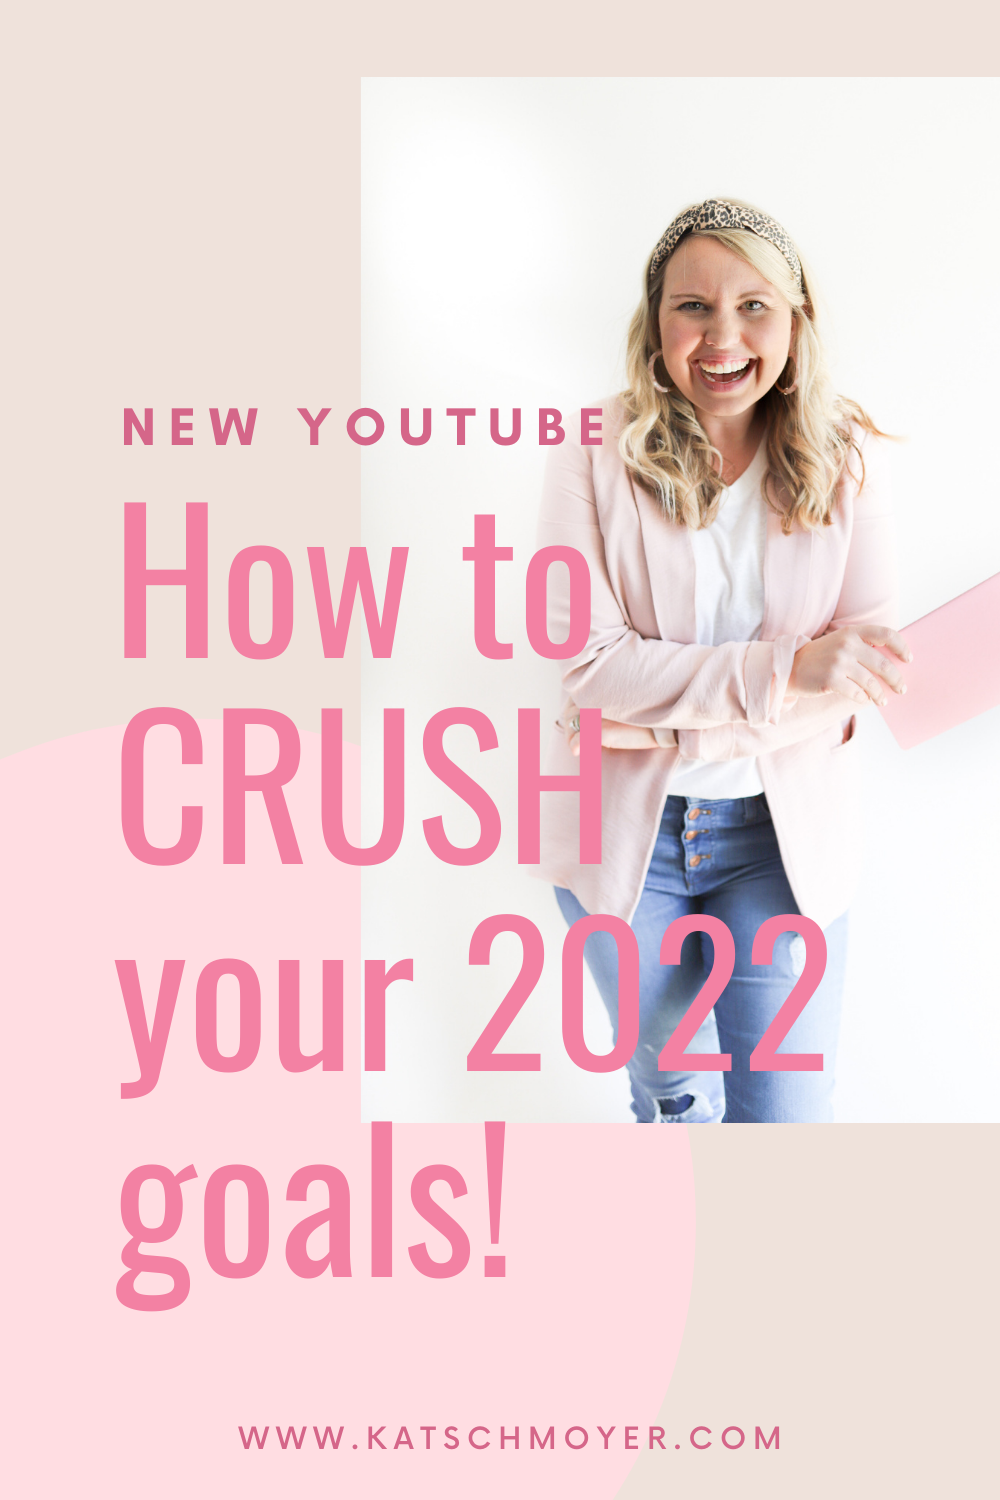 How to CRUSH your 2022 Goals